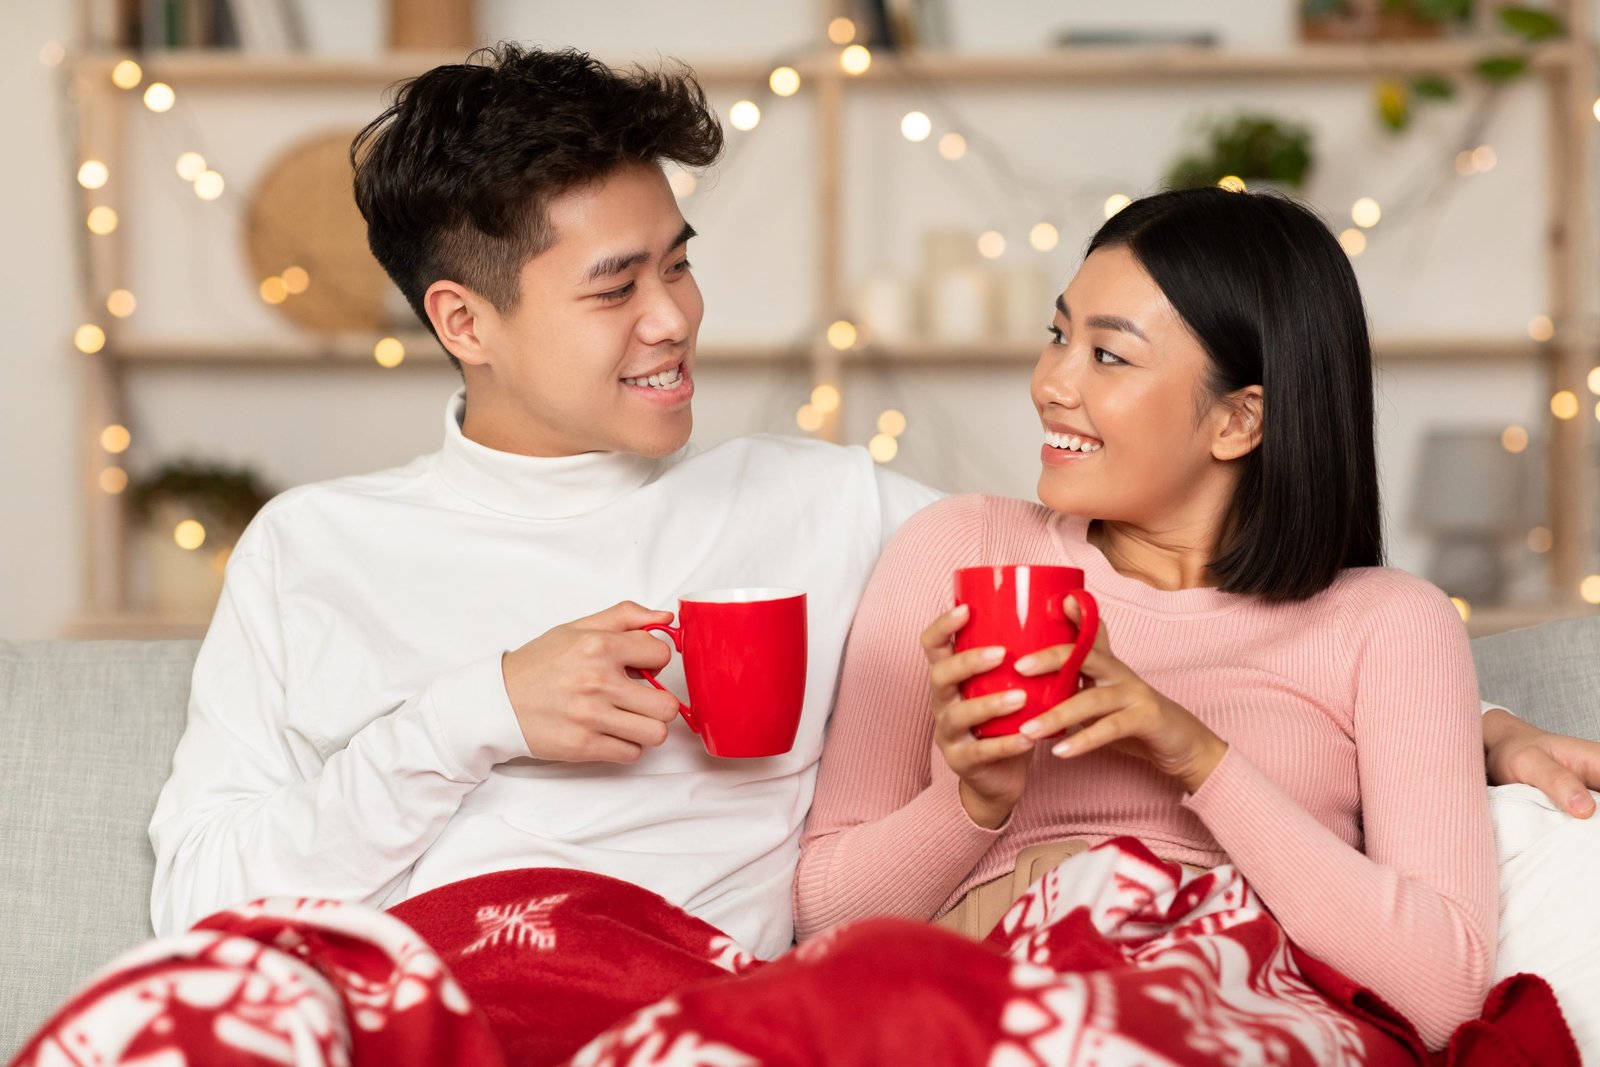 Joyful Asian Spouses Drinking Coffee Holding Mugs And Hugging Celebrating Christmas Eve Together Sitting On Sofa In Cozy Living Room At Home. Romantic Winter Date And Xmas Holidays Celebration